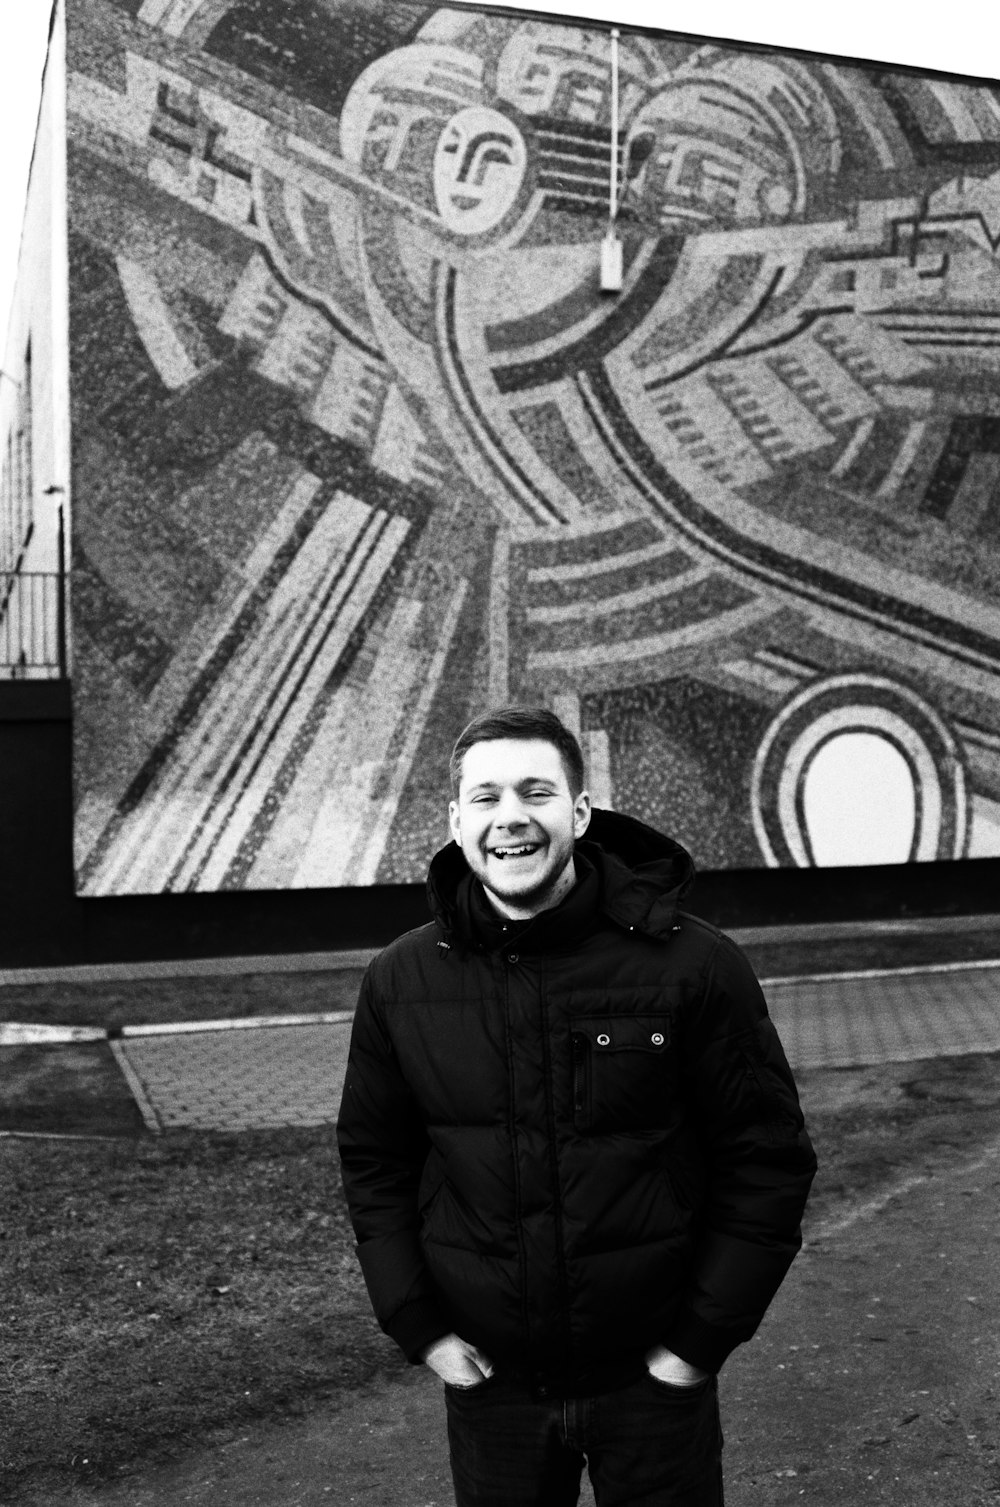 grayscale photo of man in black jacket standing near wall with graffiti